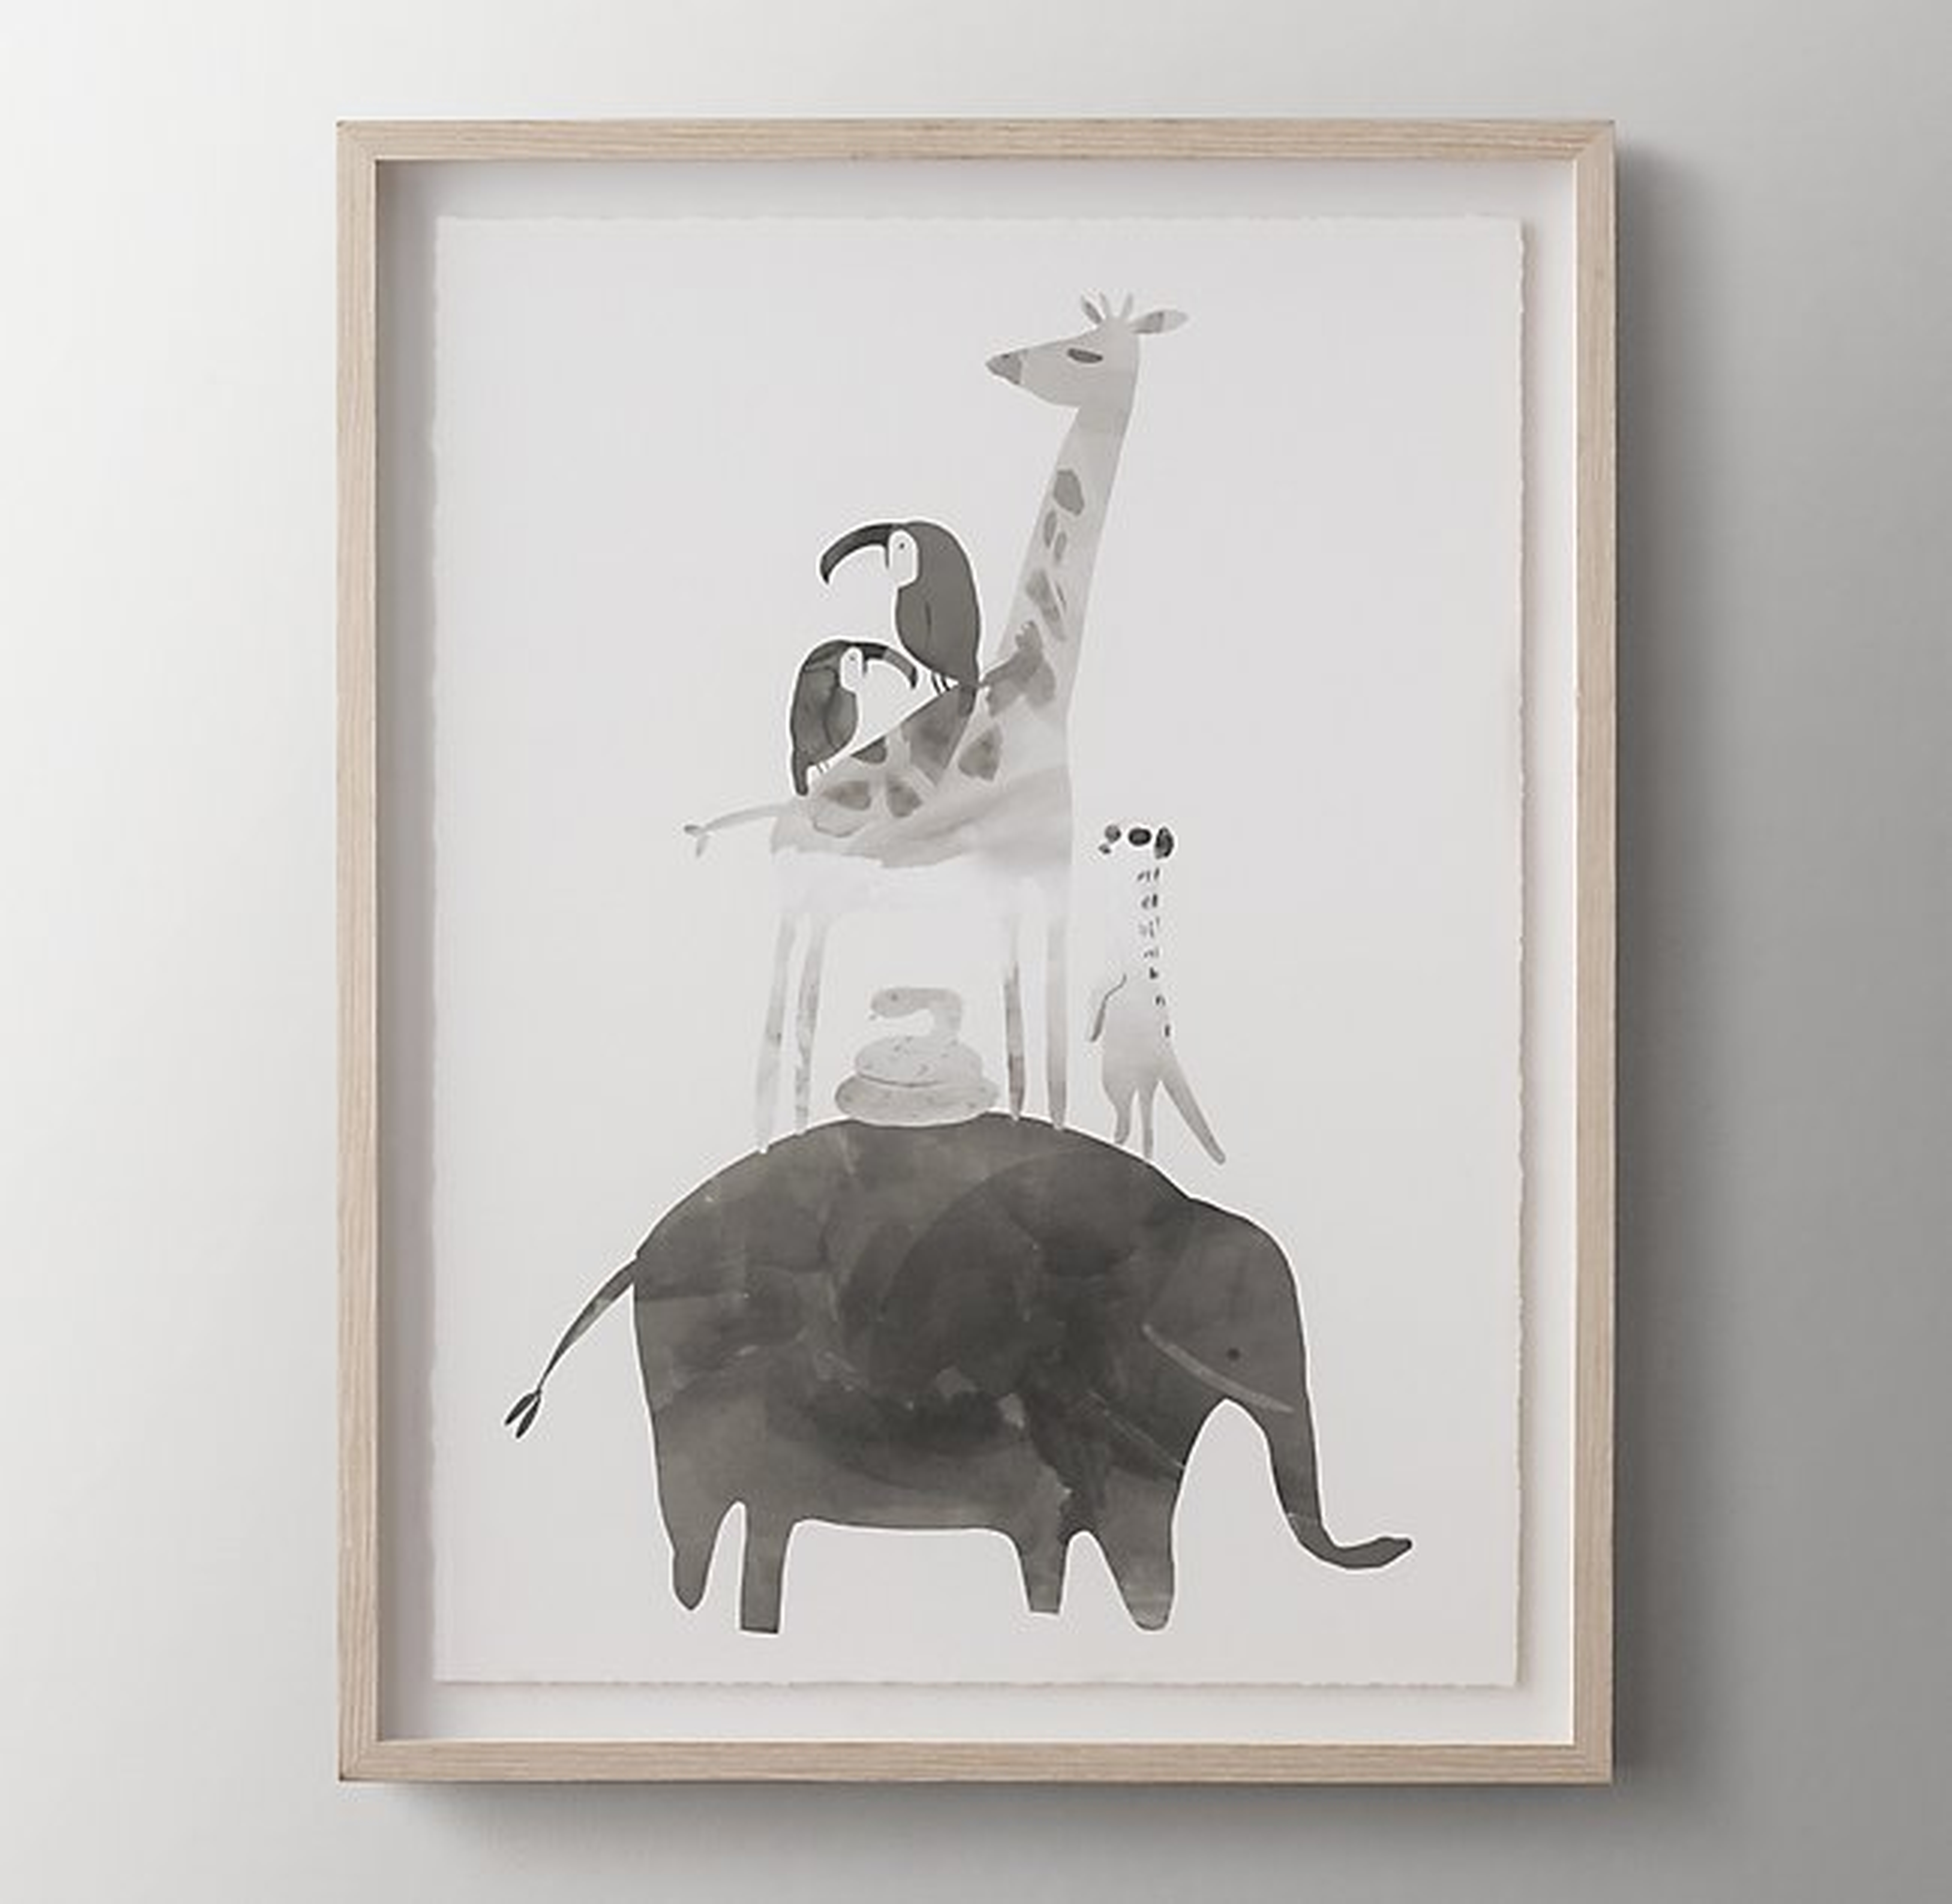 WATERCOLOR STACKED ANIMAL ART - ELEPHANT - RH Baby & Child